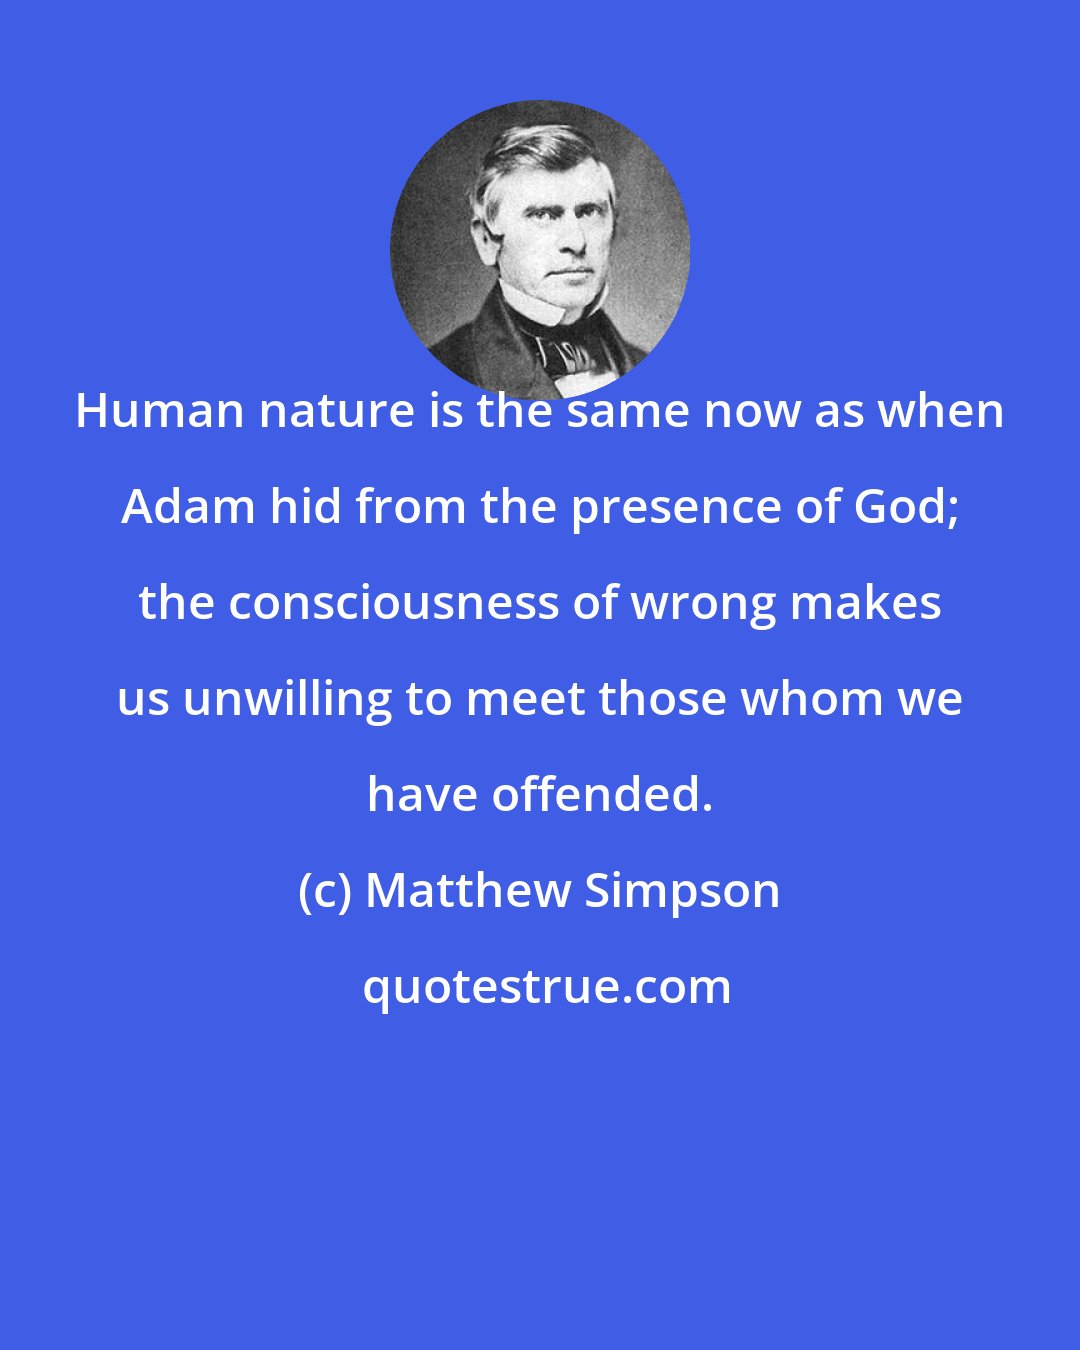 Matthew Simpson: Human nature is the same now as when Adam hid from the presence of God; the consciousness of wrong makes us unwilling to meet those whom we have offended.